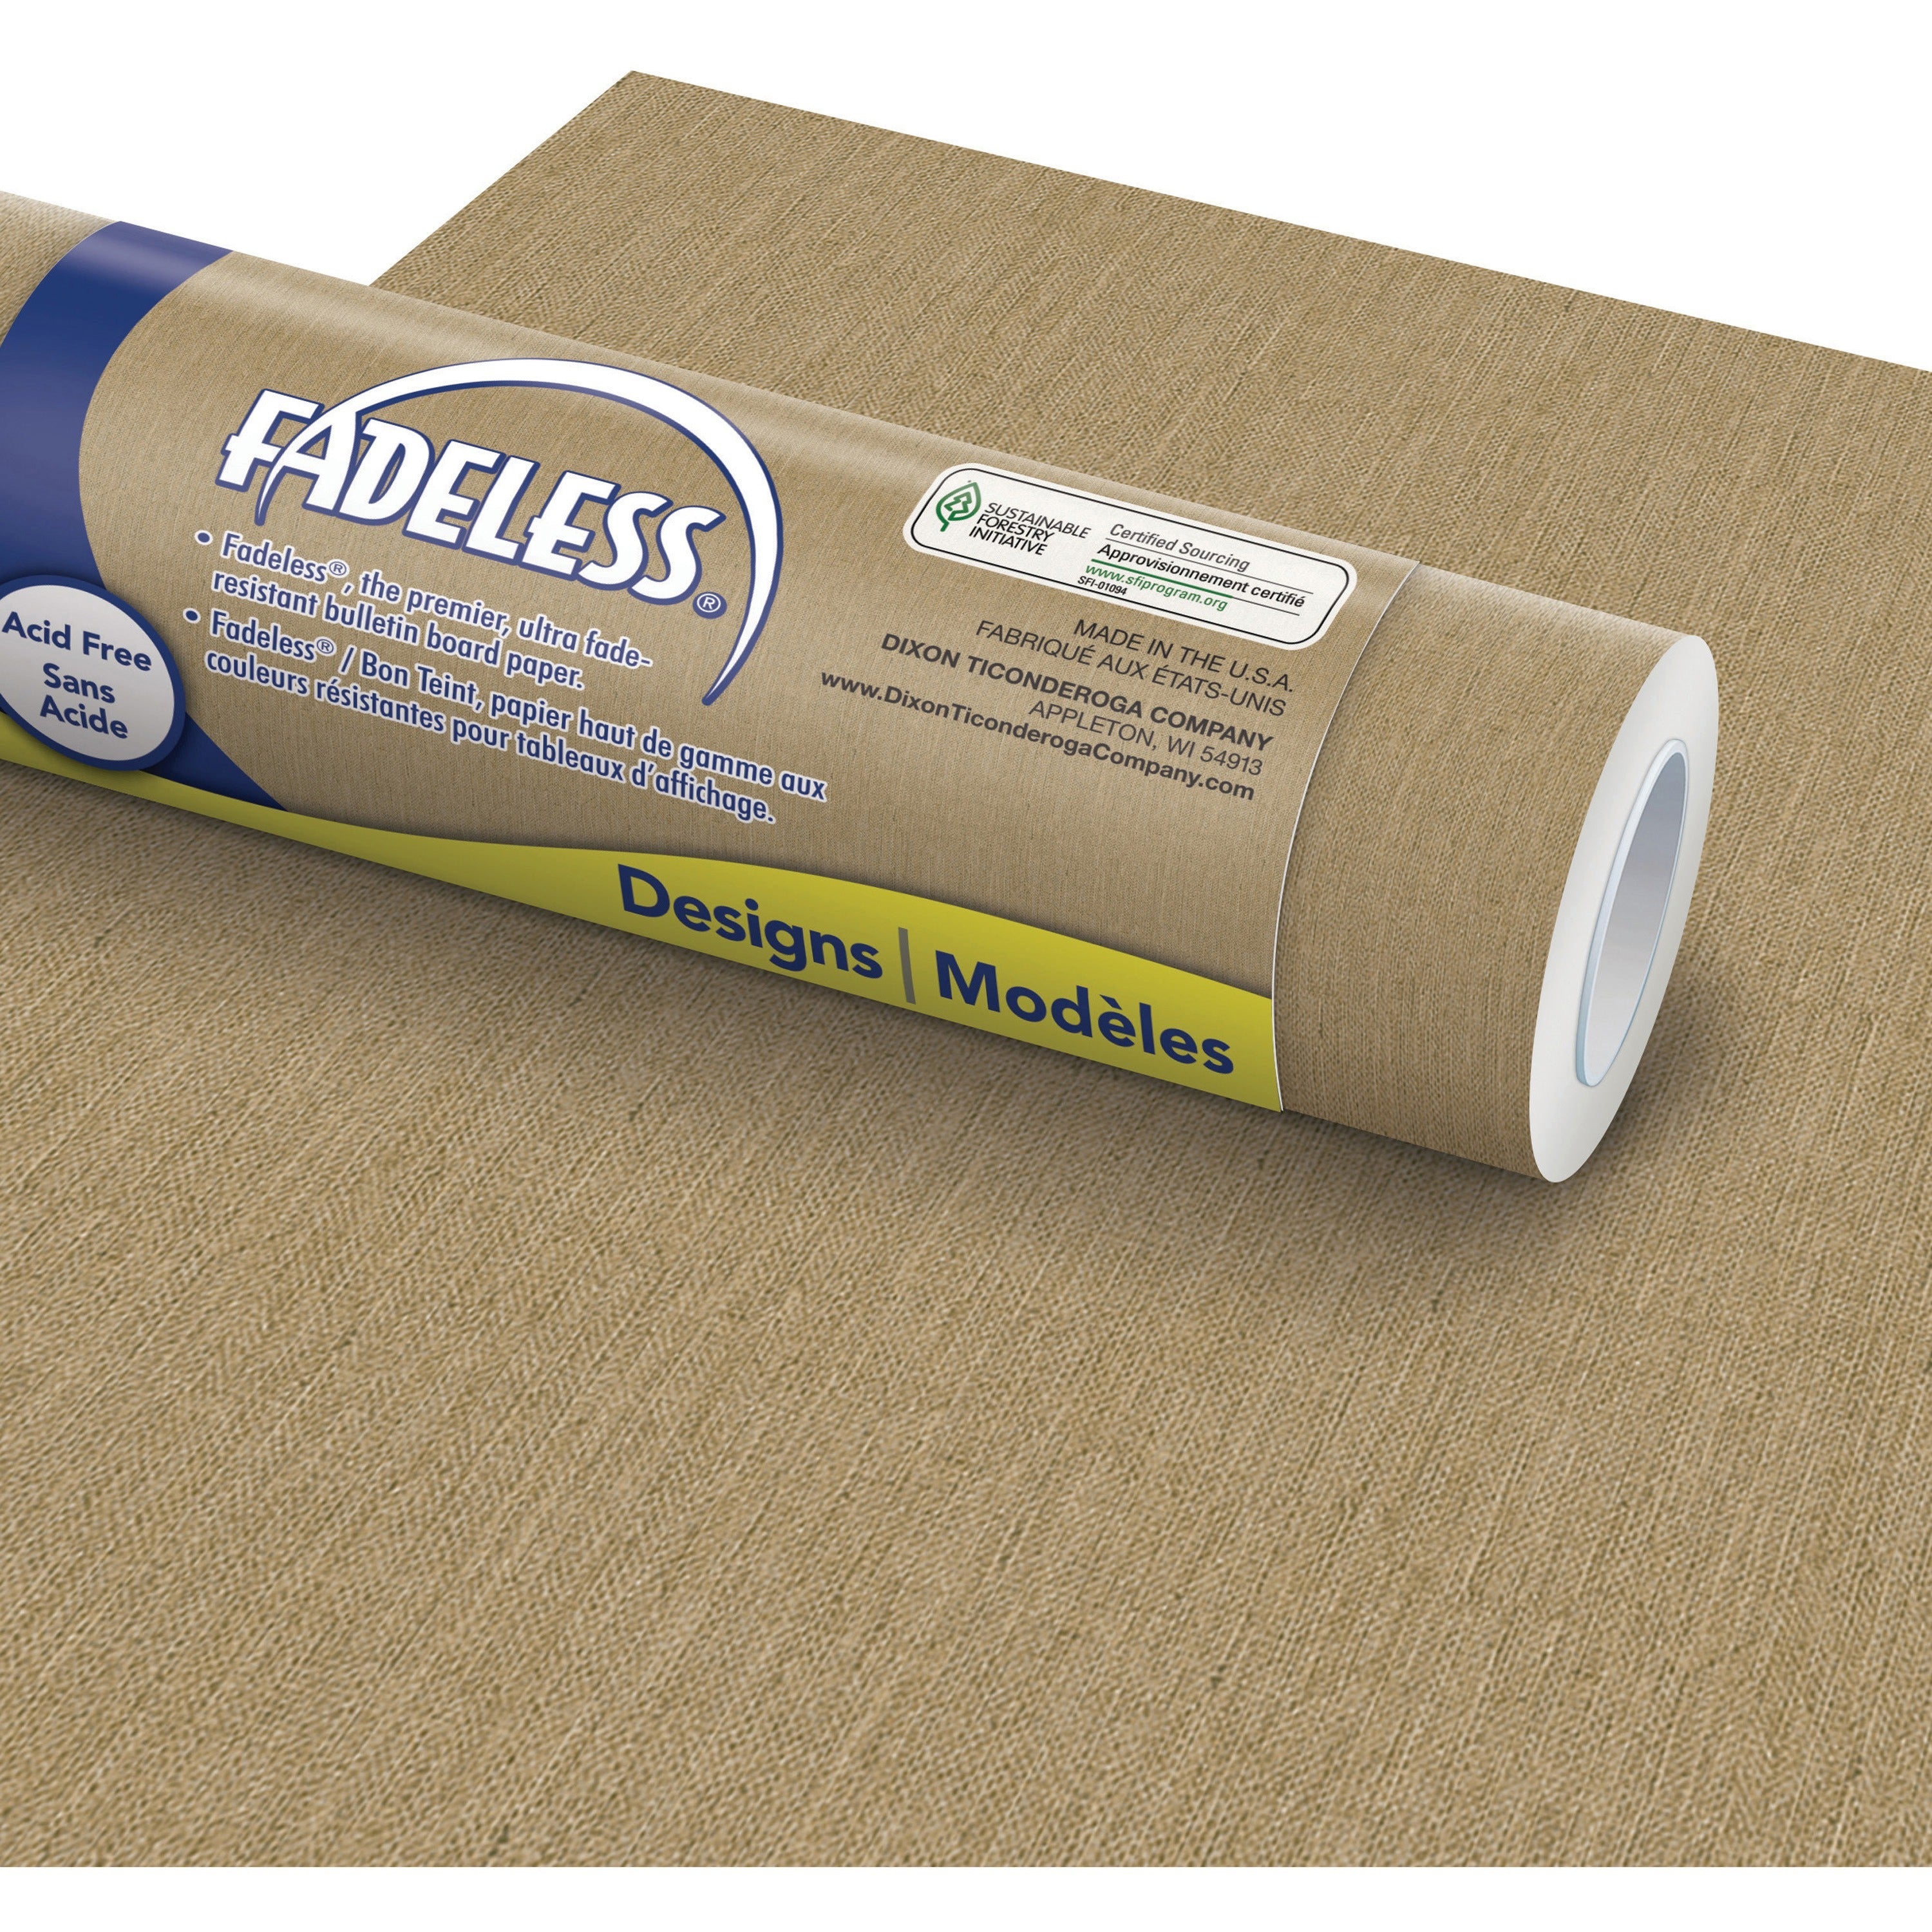 fadeless-bulletin-board-paper-rolls-bulletin-board-classroom-fun-and-learning-file-cabinet-door-display-paper-sculpture-table-skirting-party-home-project-office-project--48width-x-50-ftlength-50-lb-basis-weight-1-roll-natural_pacp0057395 - 1